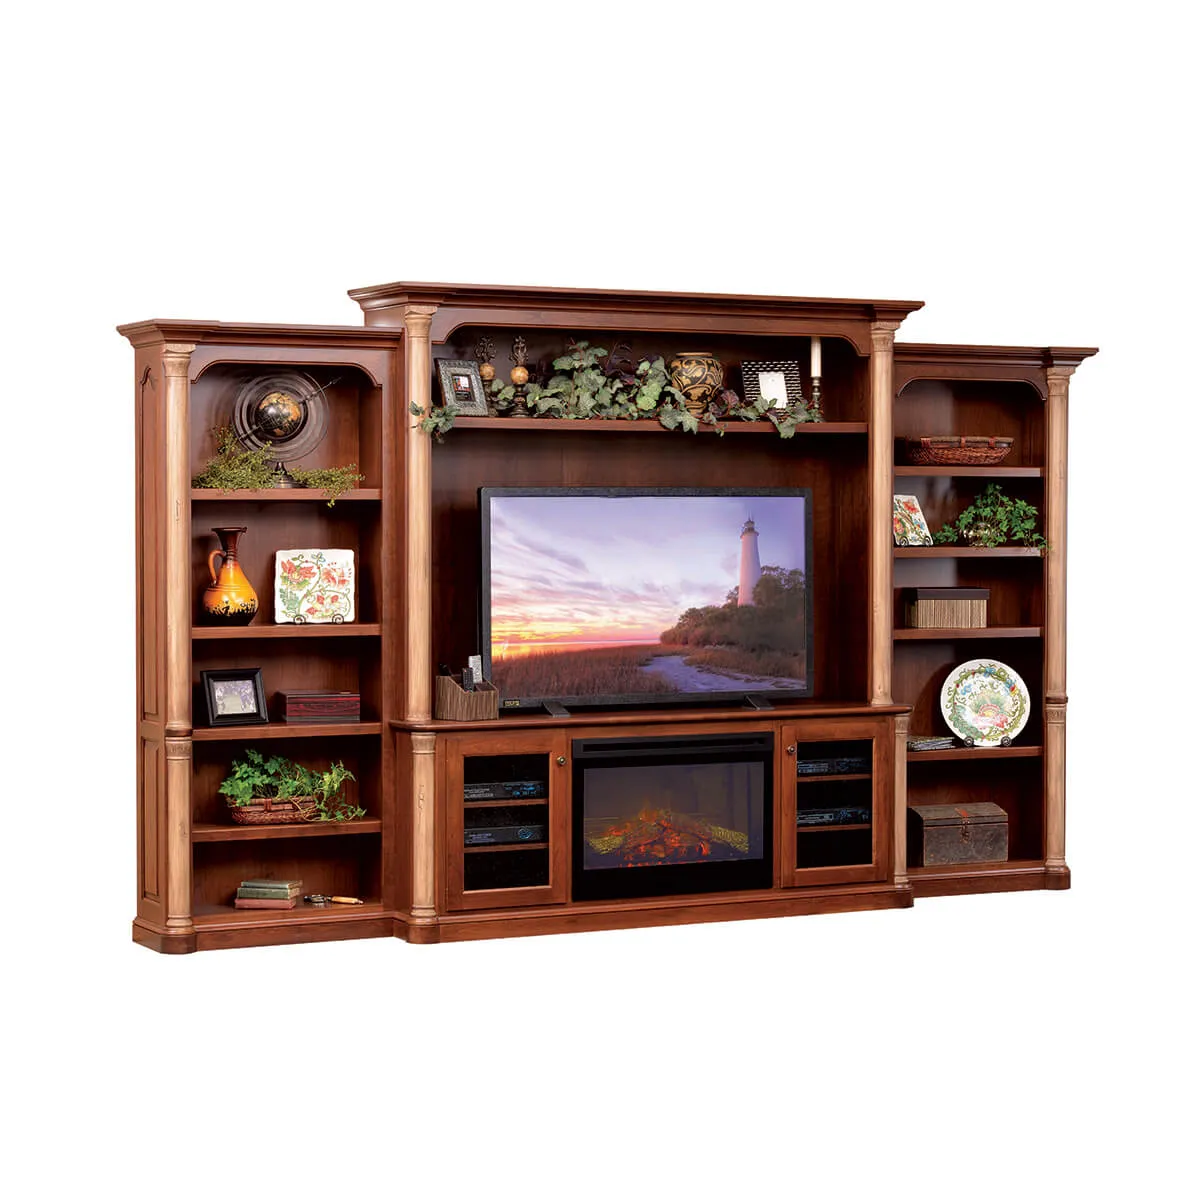 #JEF-657XL Jefferson Entertainment Center with Side Bookcases & Fireplace